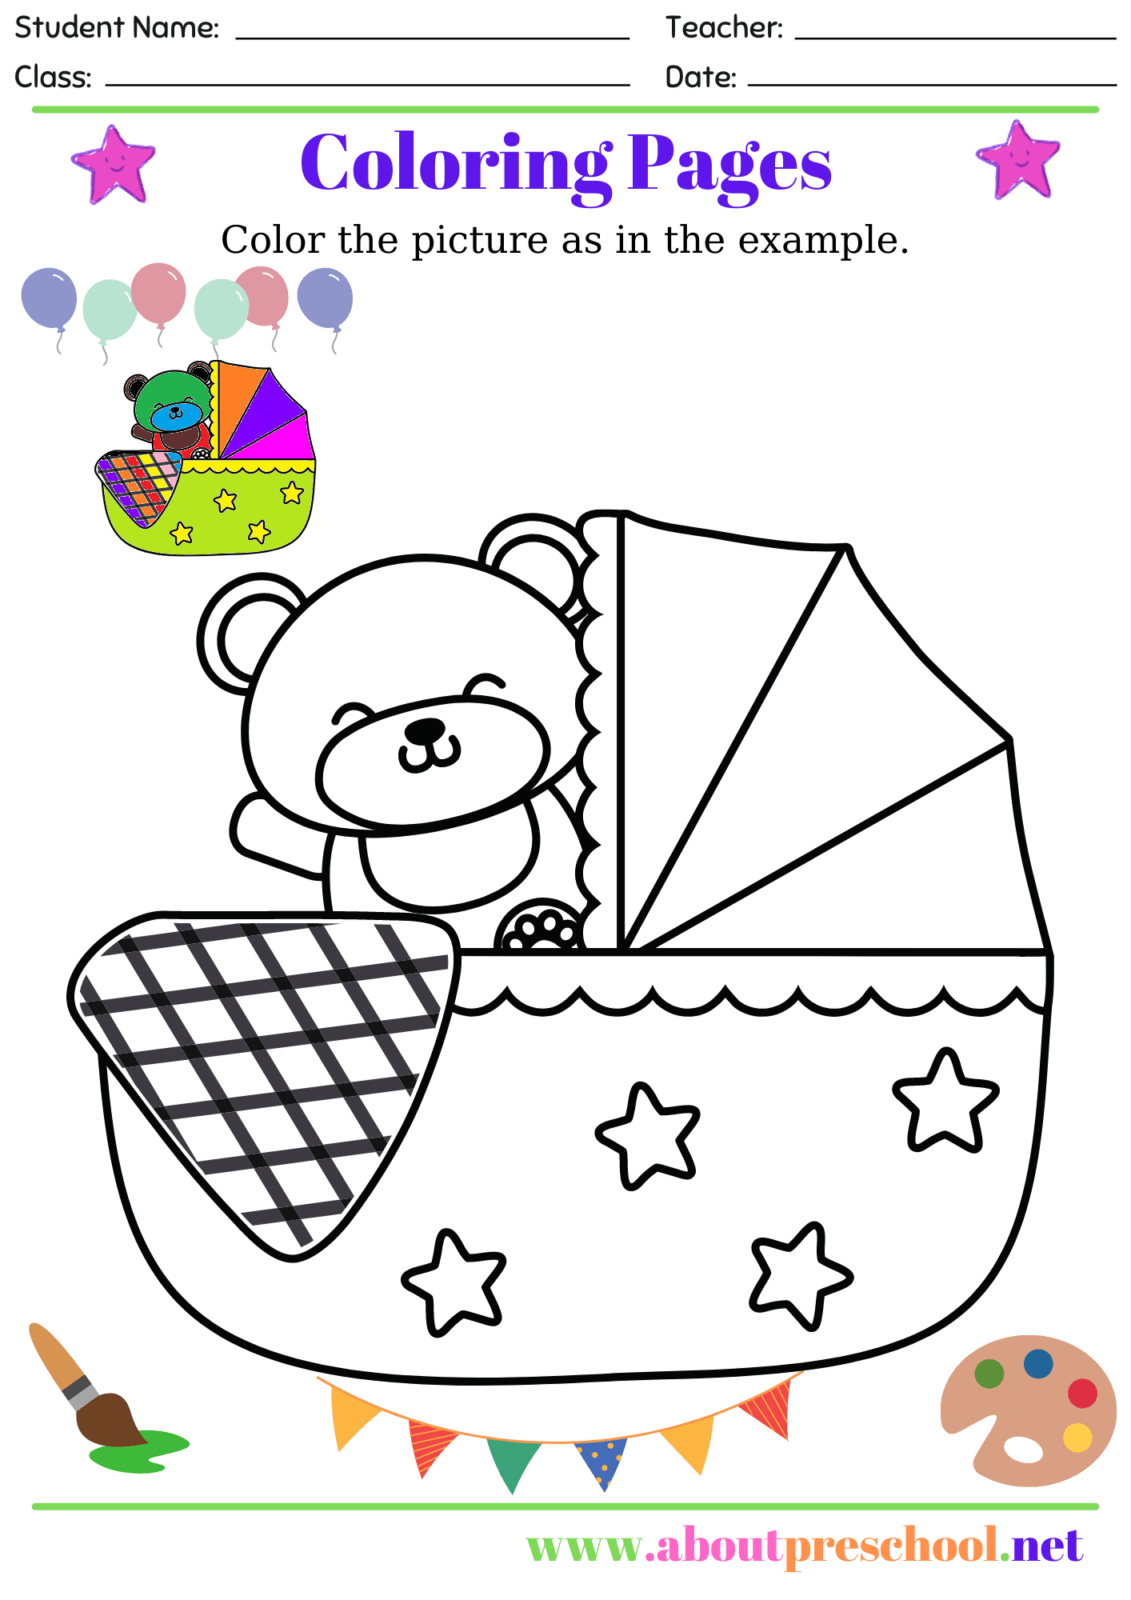 Coloring Pages-10